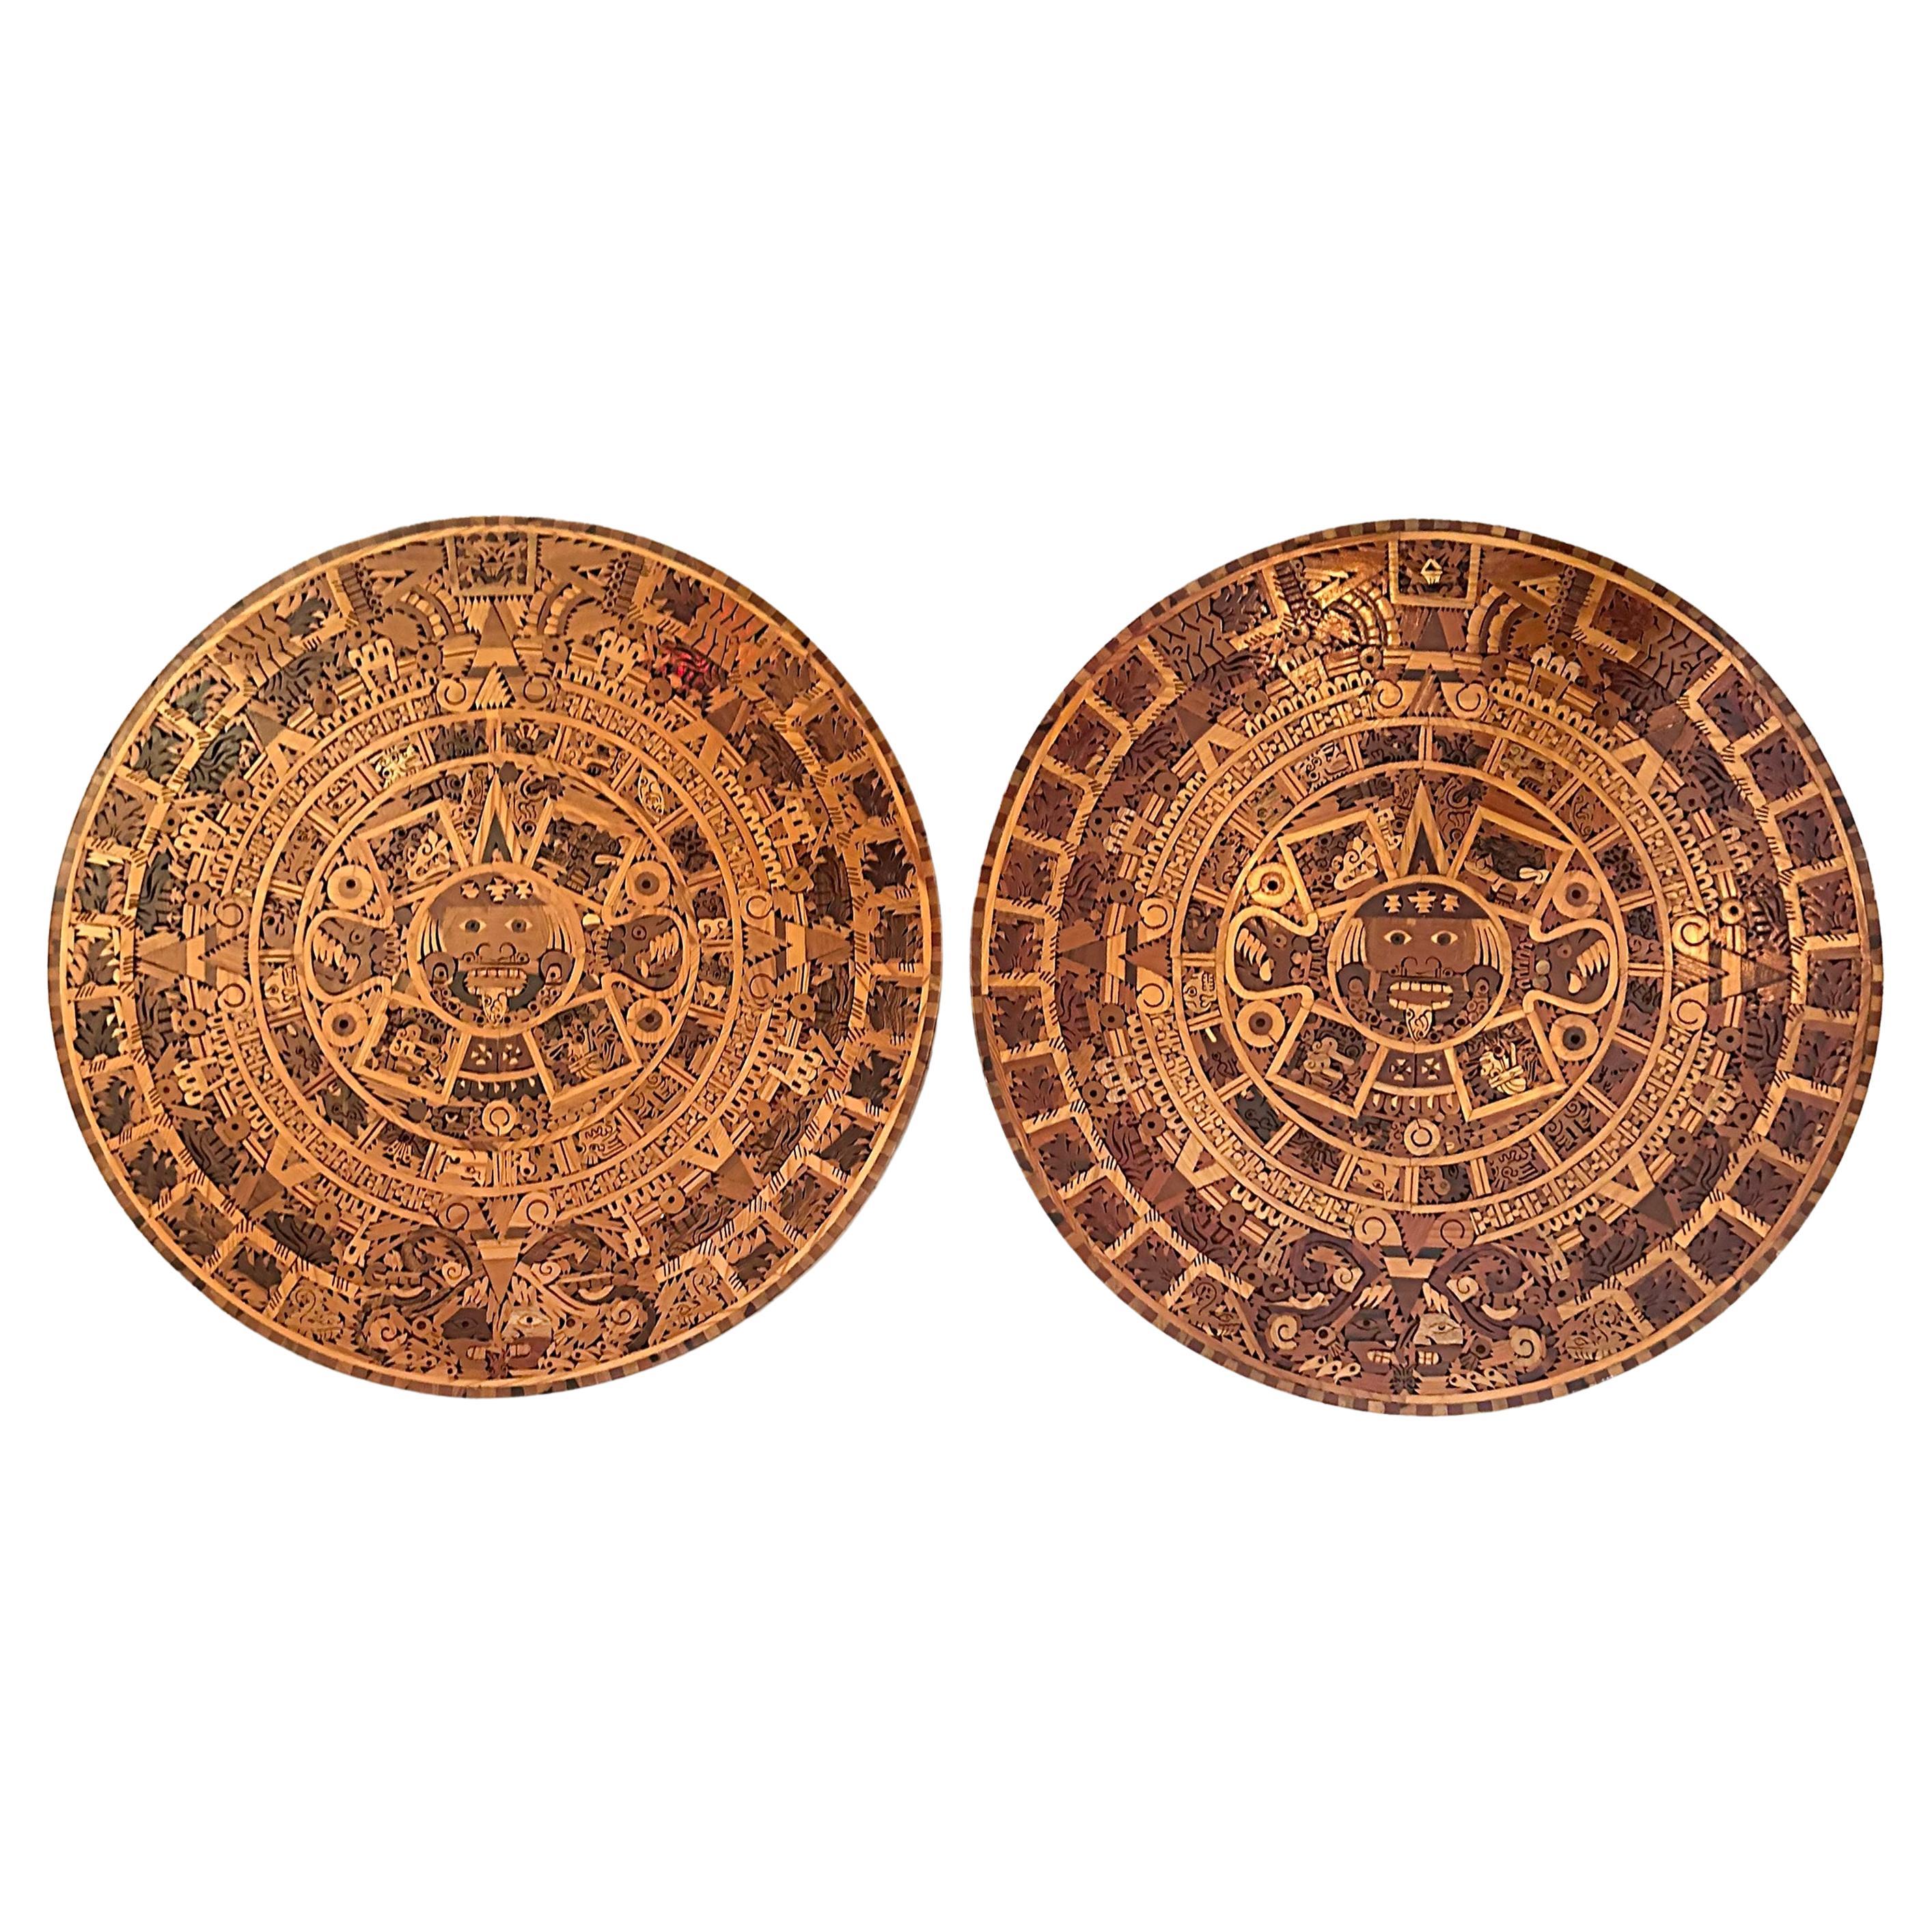 Handmade Mexican Exotic Wood Aztec Calendar Wall Sculpture- Only One Available For Sale